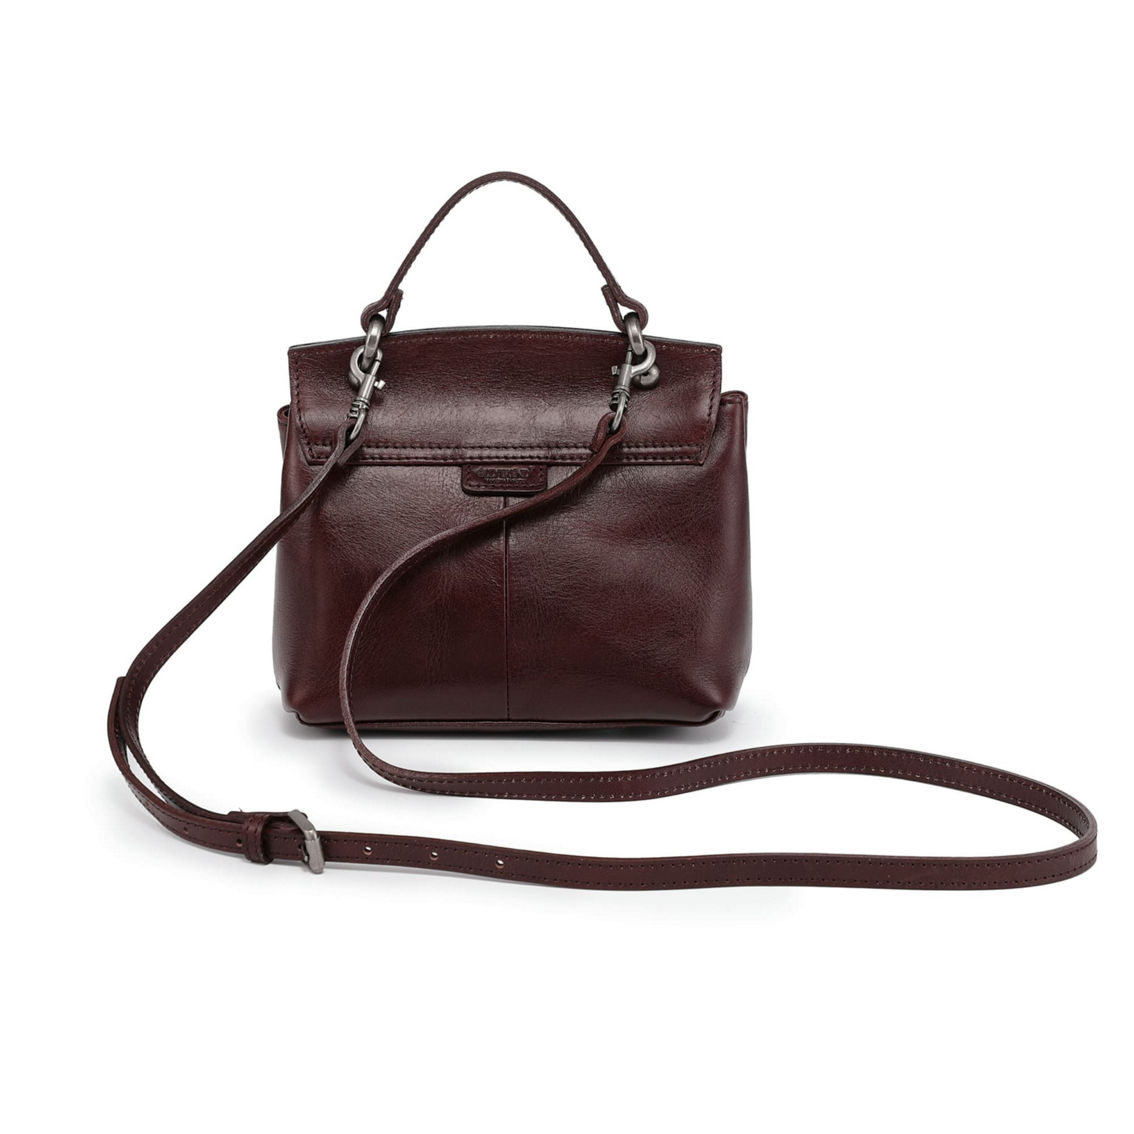 Old Trend Cypress Leather Crossbody - Image 4 of 5